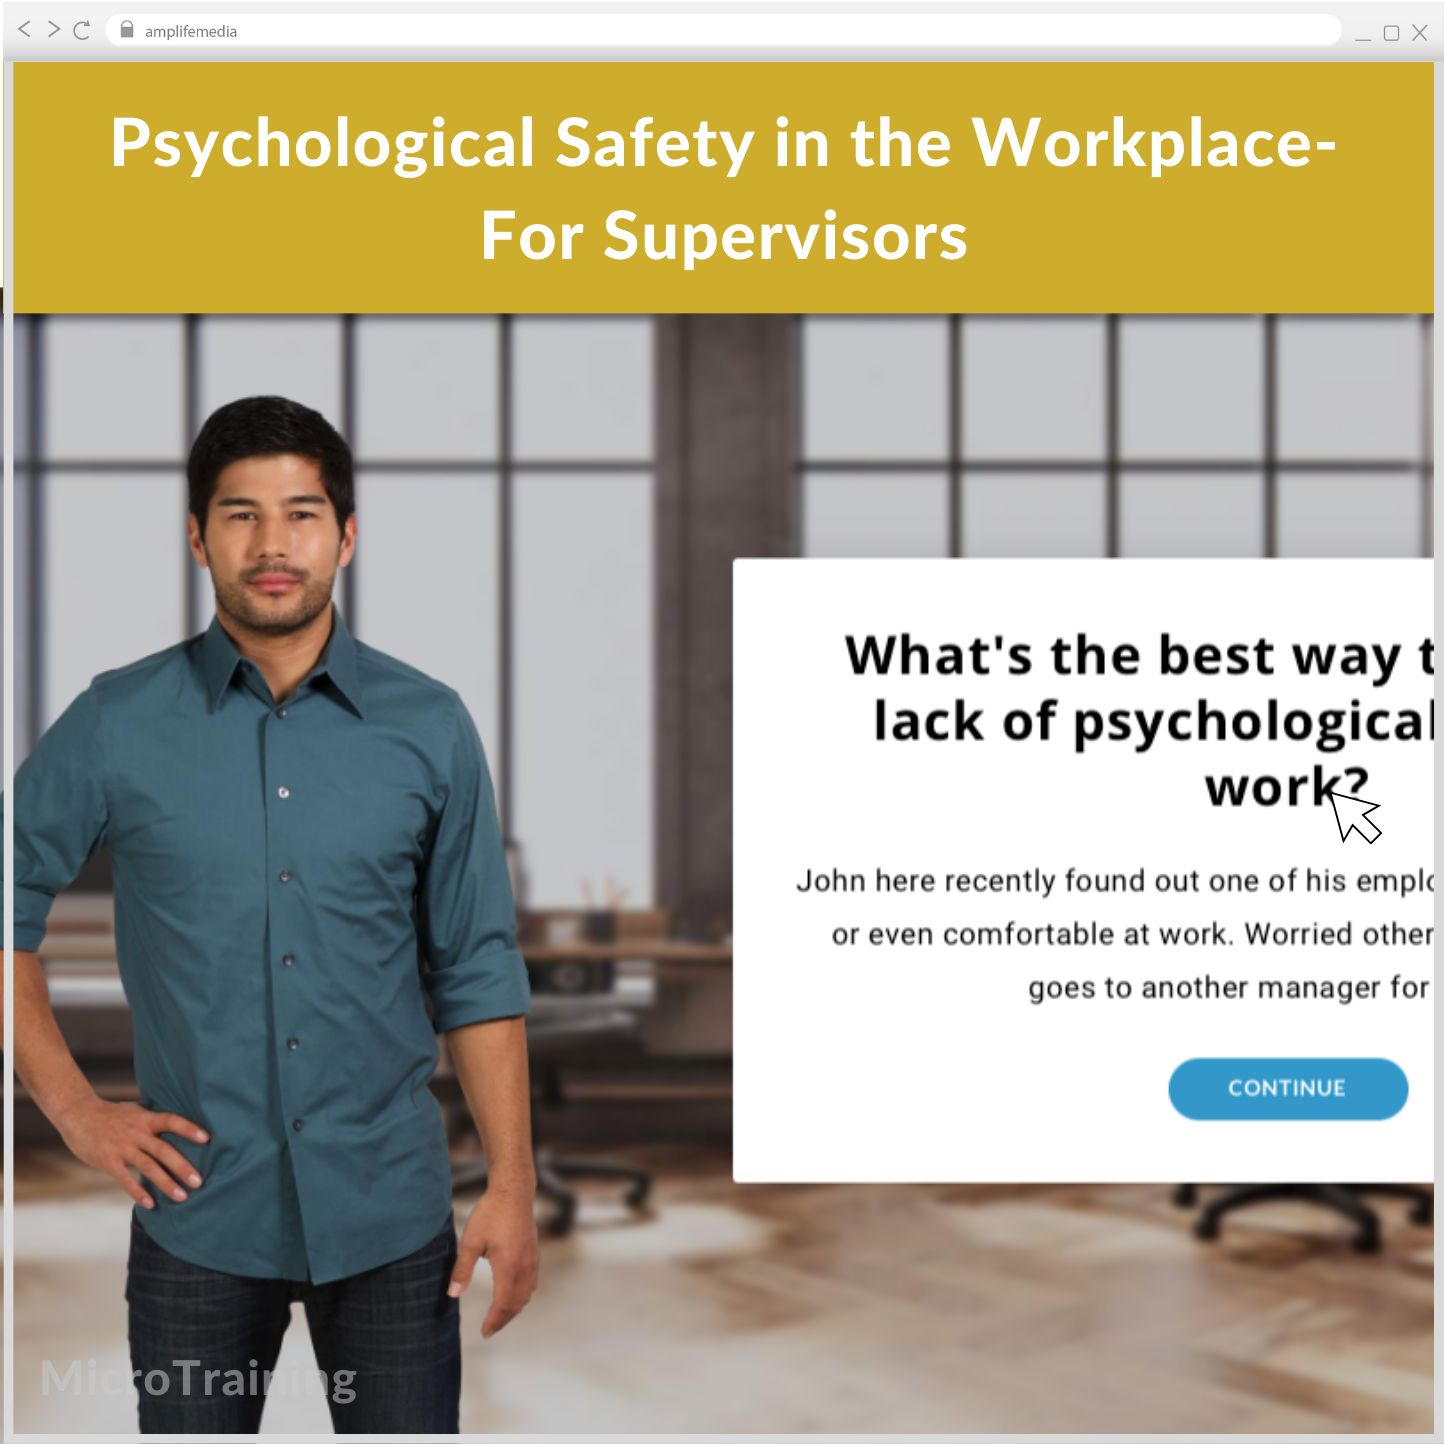 Subscription to Wellbeing Media: Psychological Safety in the Workplace- For Supervisors MT 1223